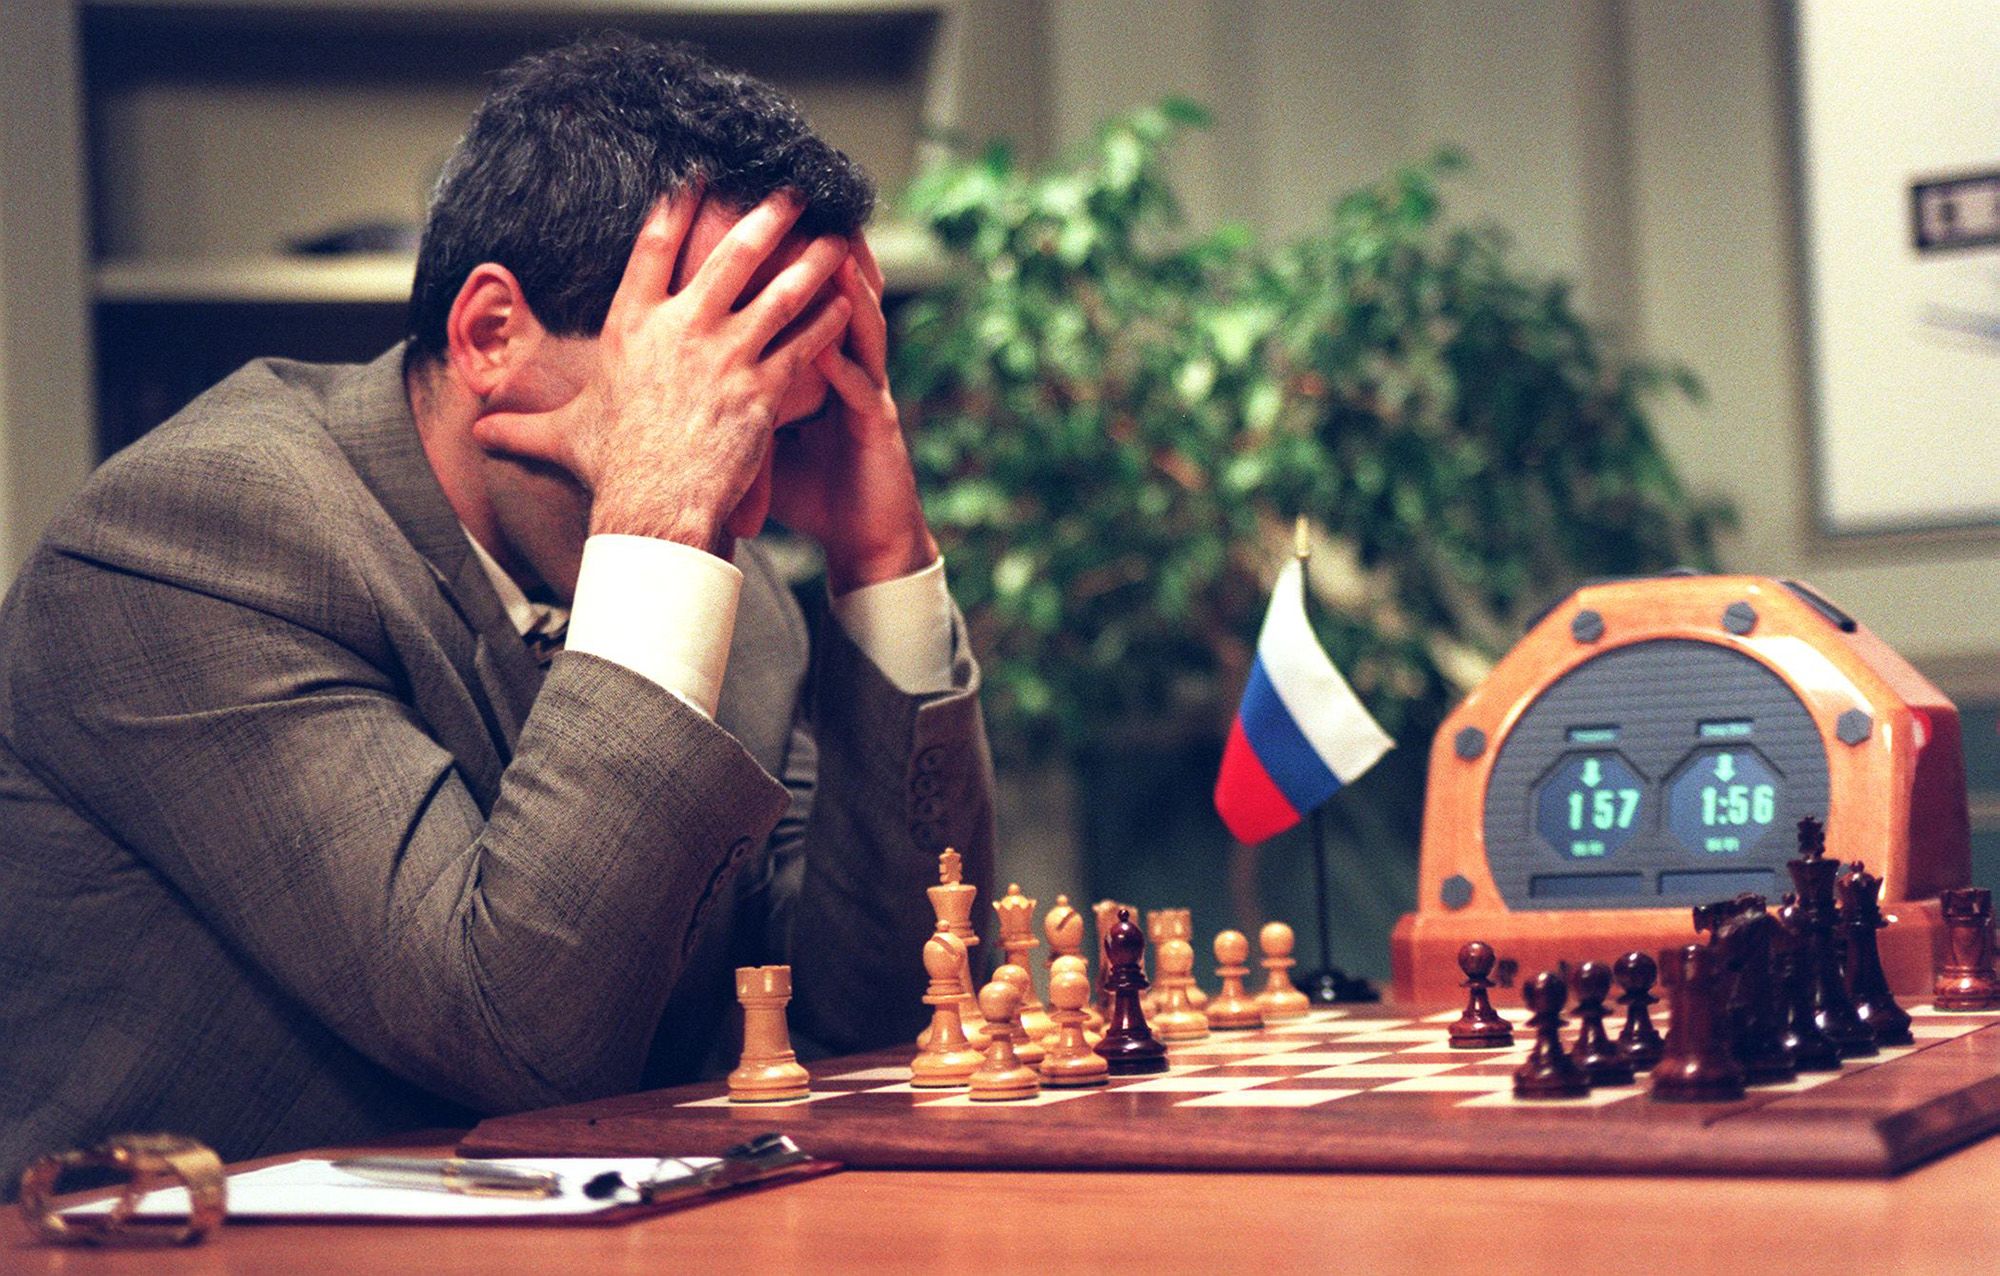 How to detect if the opponent is cheating on online chess - Quora